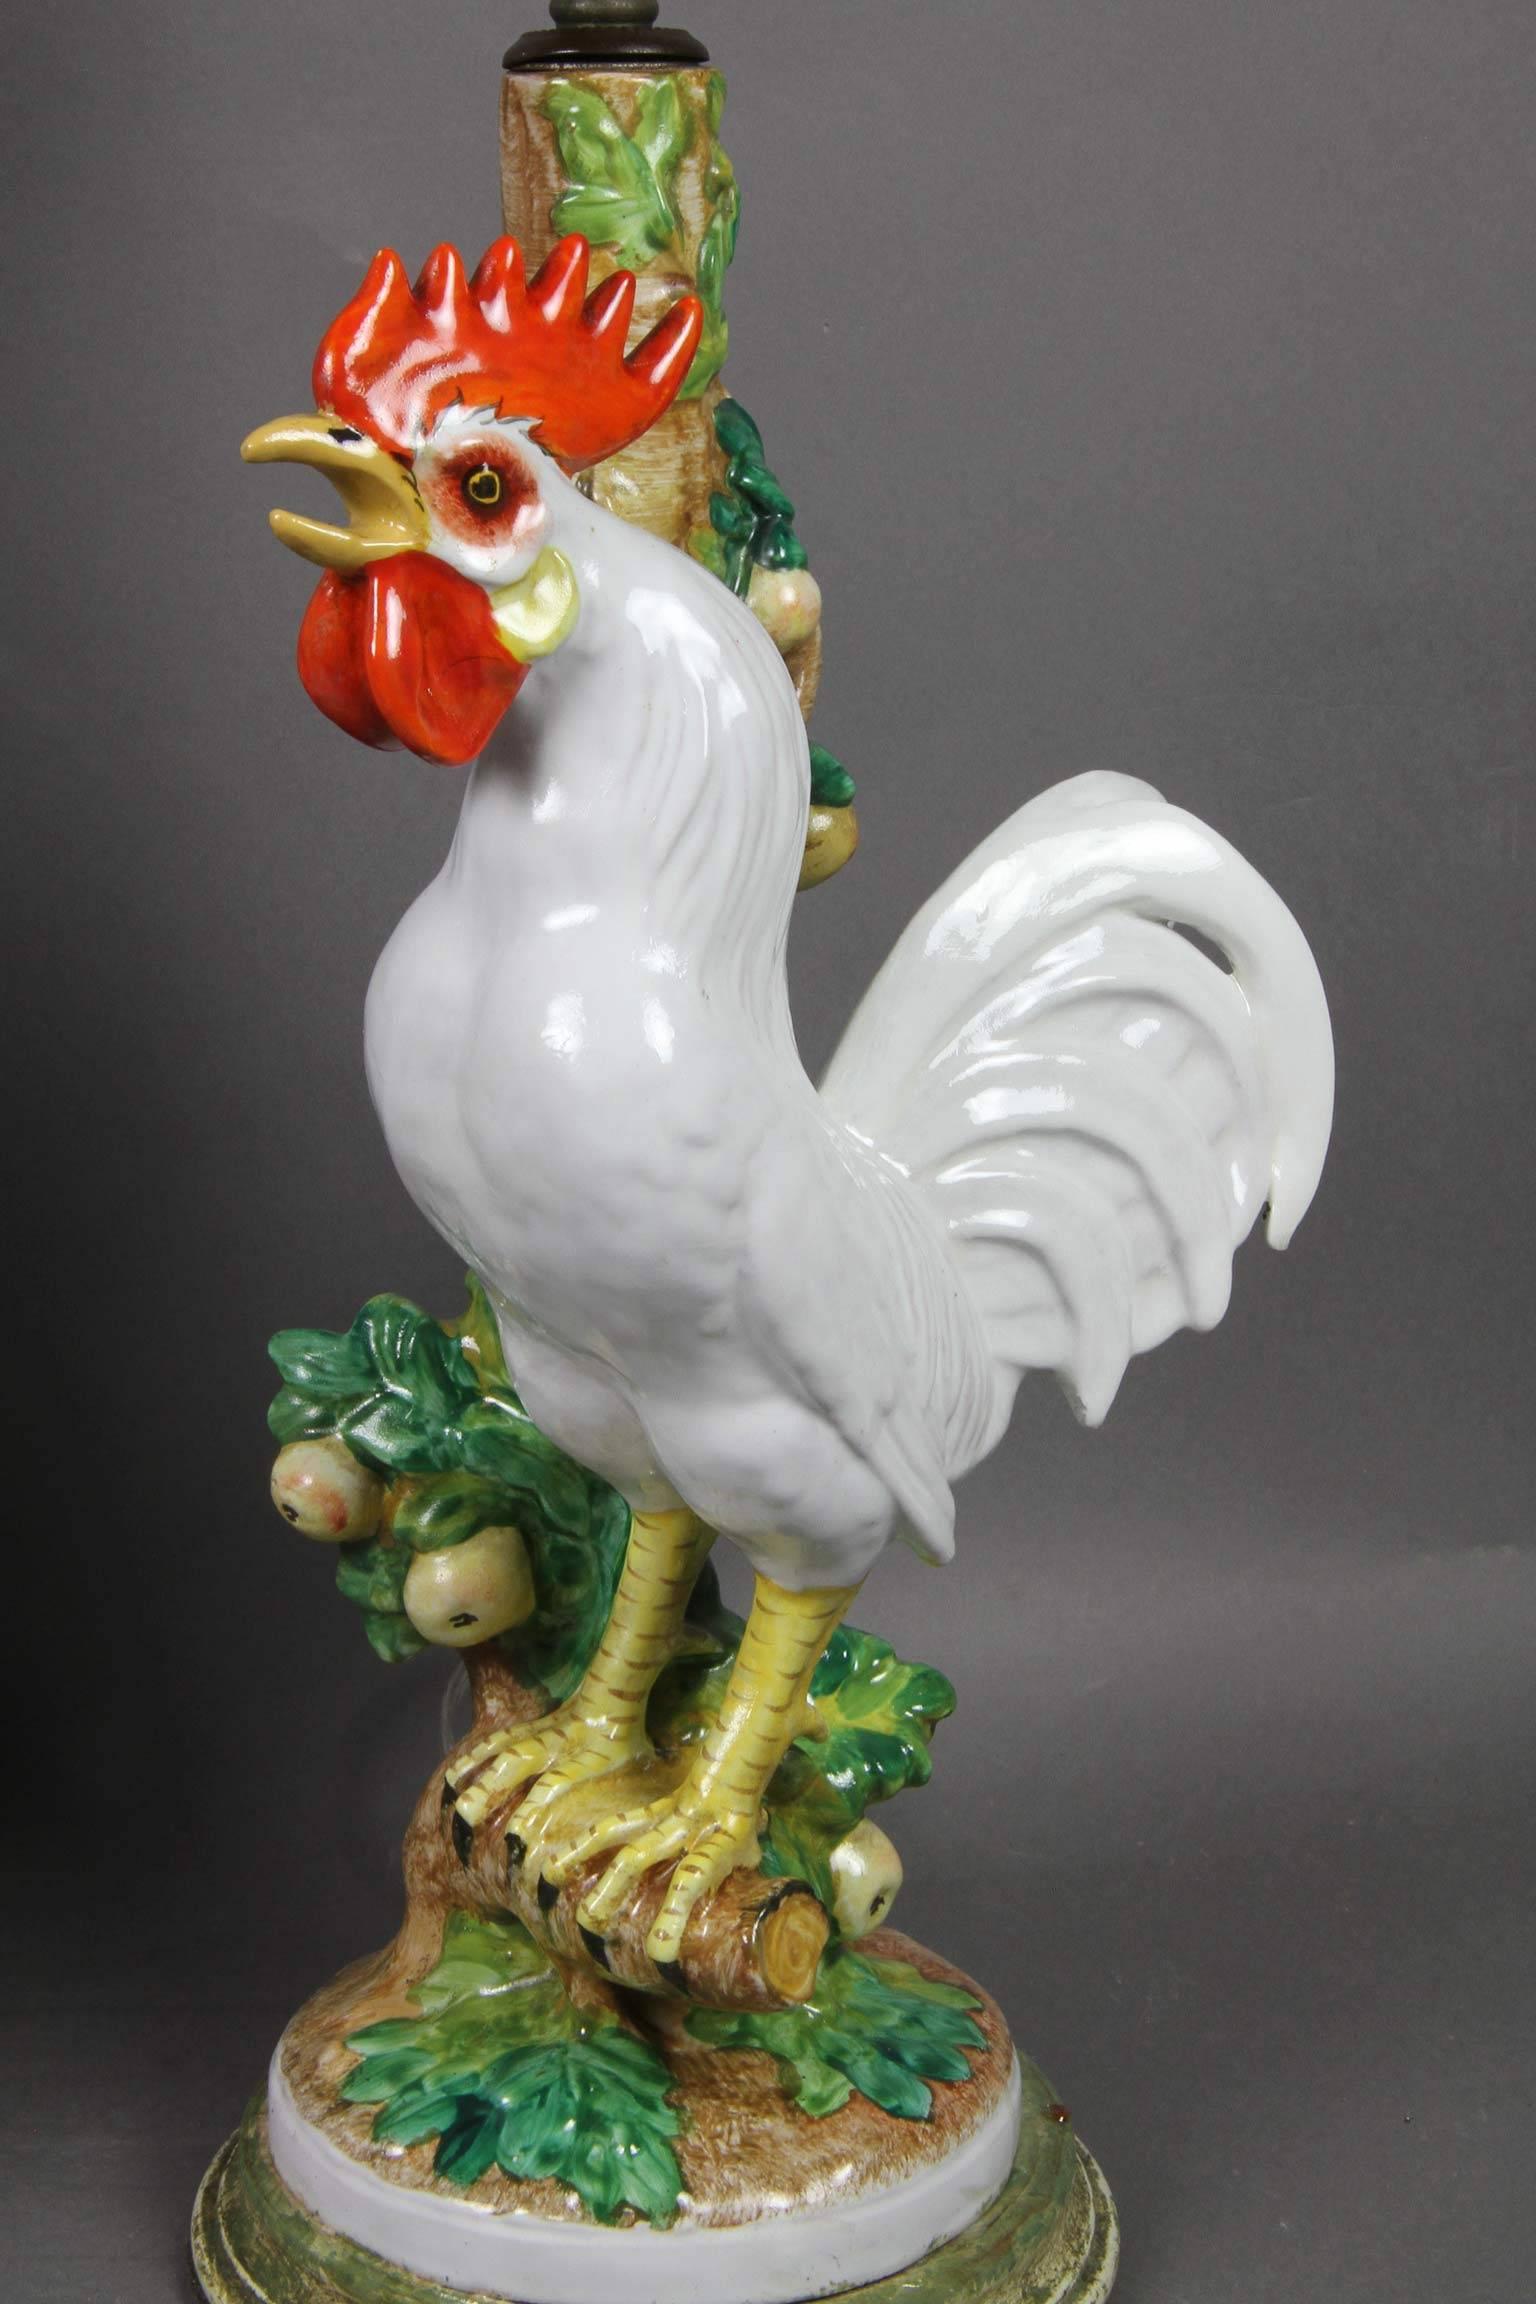 One with one rooster the other with two standing on branches on circular bases.